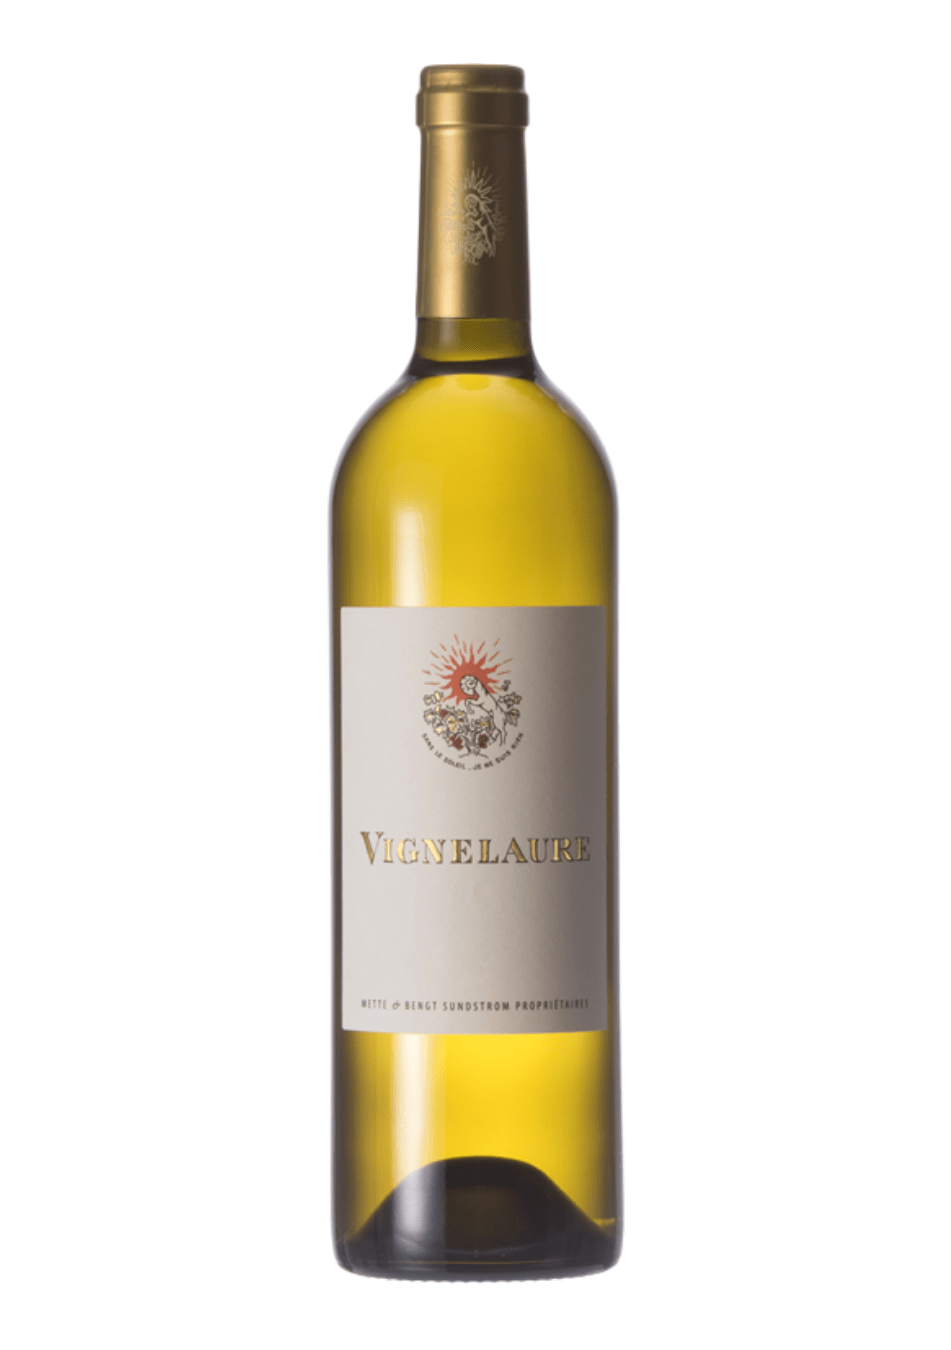 Shop Chateau Vignelaure Chateau Vignelaure Blanc IGP Mediterranee 2017 online at PENTICTON artisanal wine store in Hong Kong. Discover other French wines, promotions, workshops and featured offers at pentictonpacific.com 